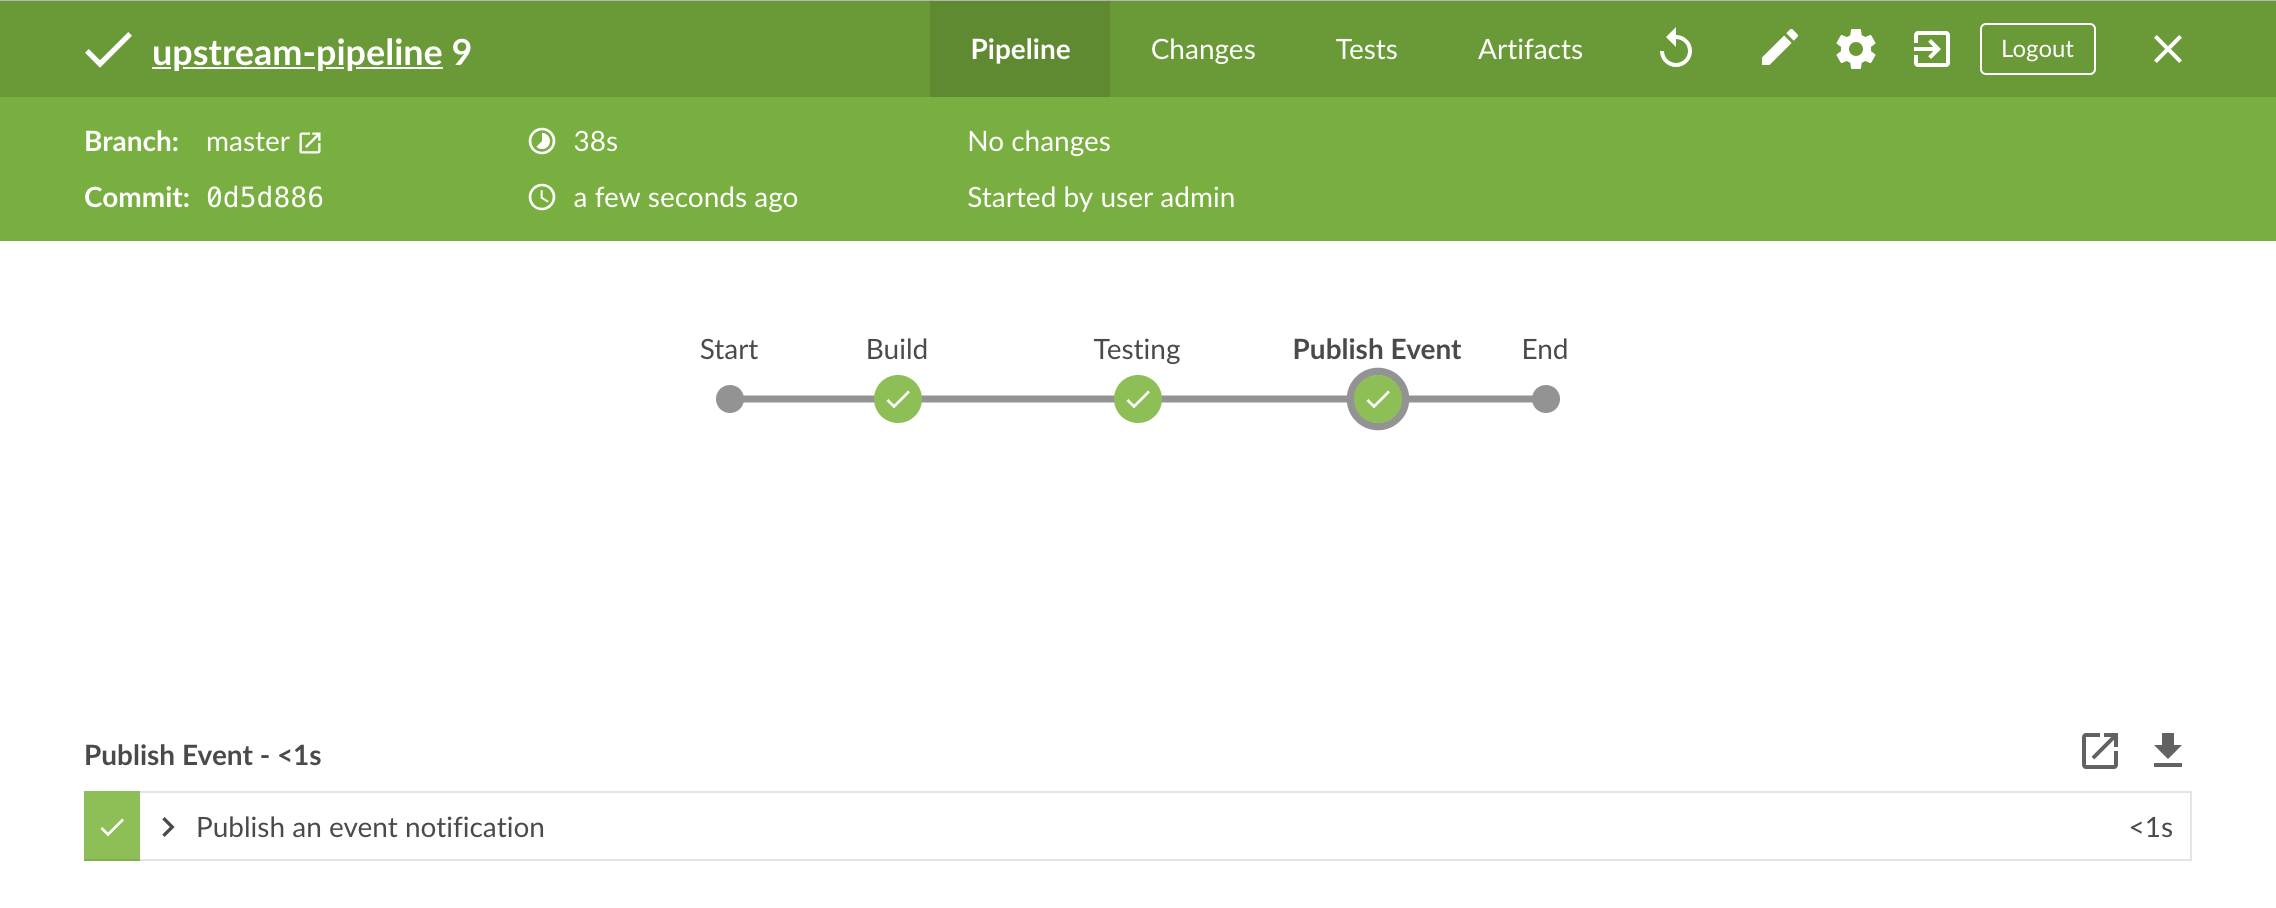 Upstream Pipeline detailed status page